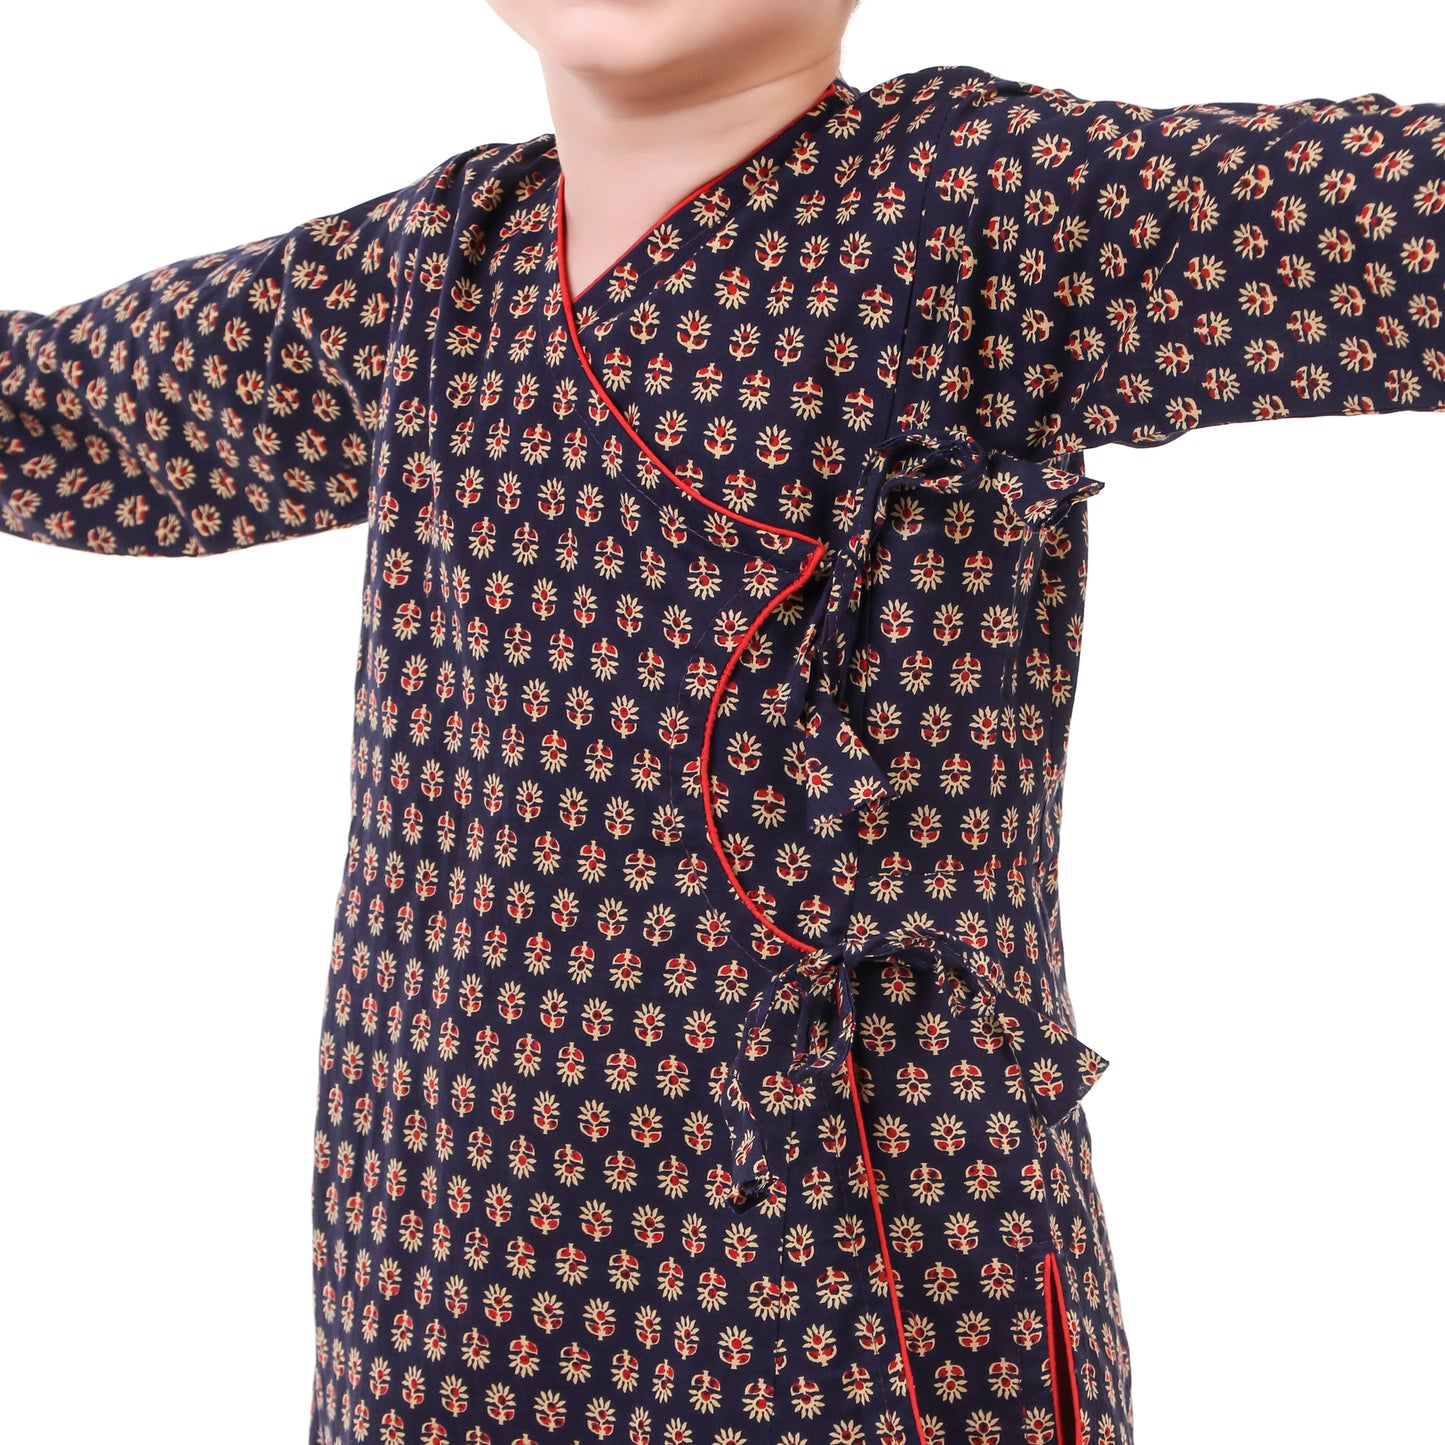 Blue Dhoti Kurta for Boys, Ages 3 Months-16 Years, Cotton, Angrakha Style, Block Print